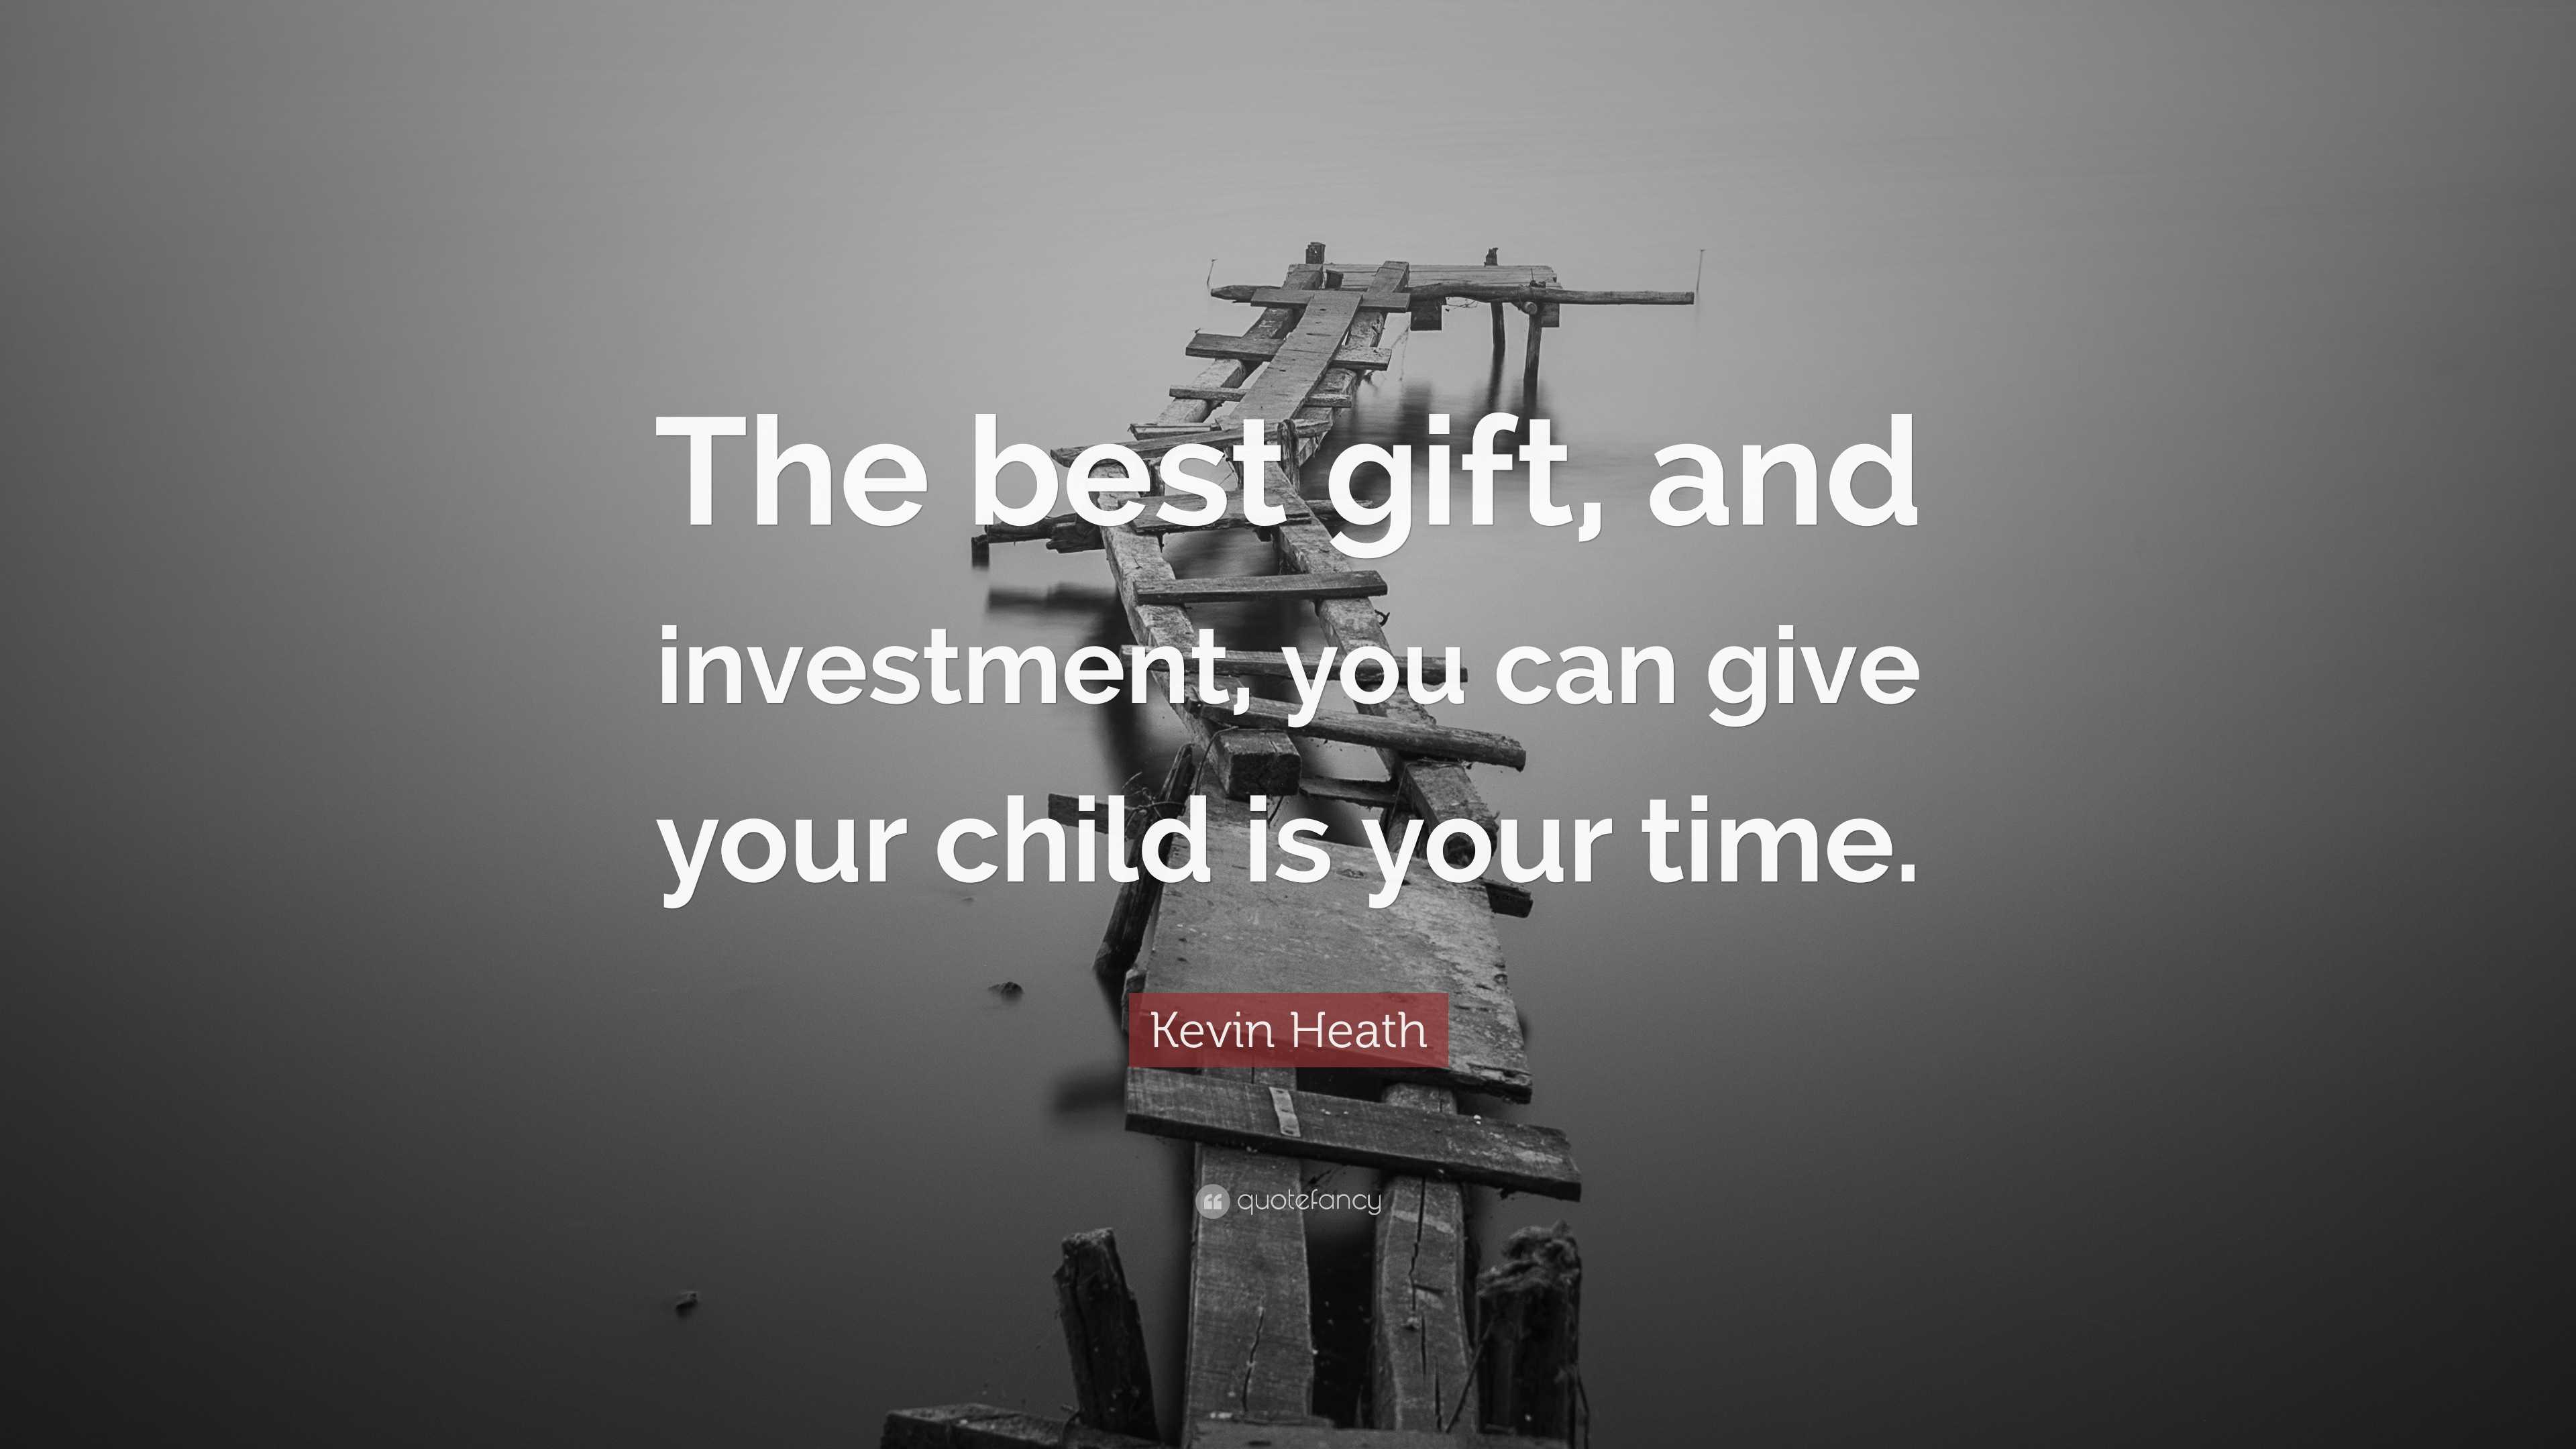 https://quotefancy.com/media/wallpaper/3840x2160/7724190-Kevin-Heath-Quote-The-best-gift-and-investment-you-can-give-your.jpg